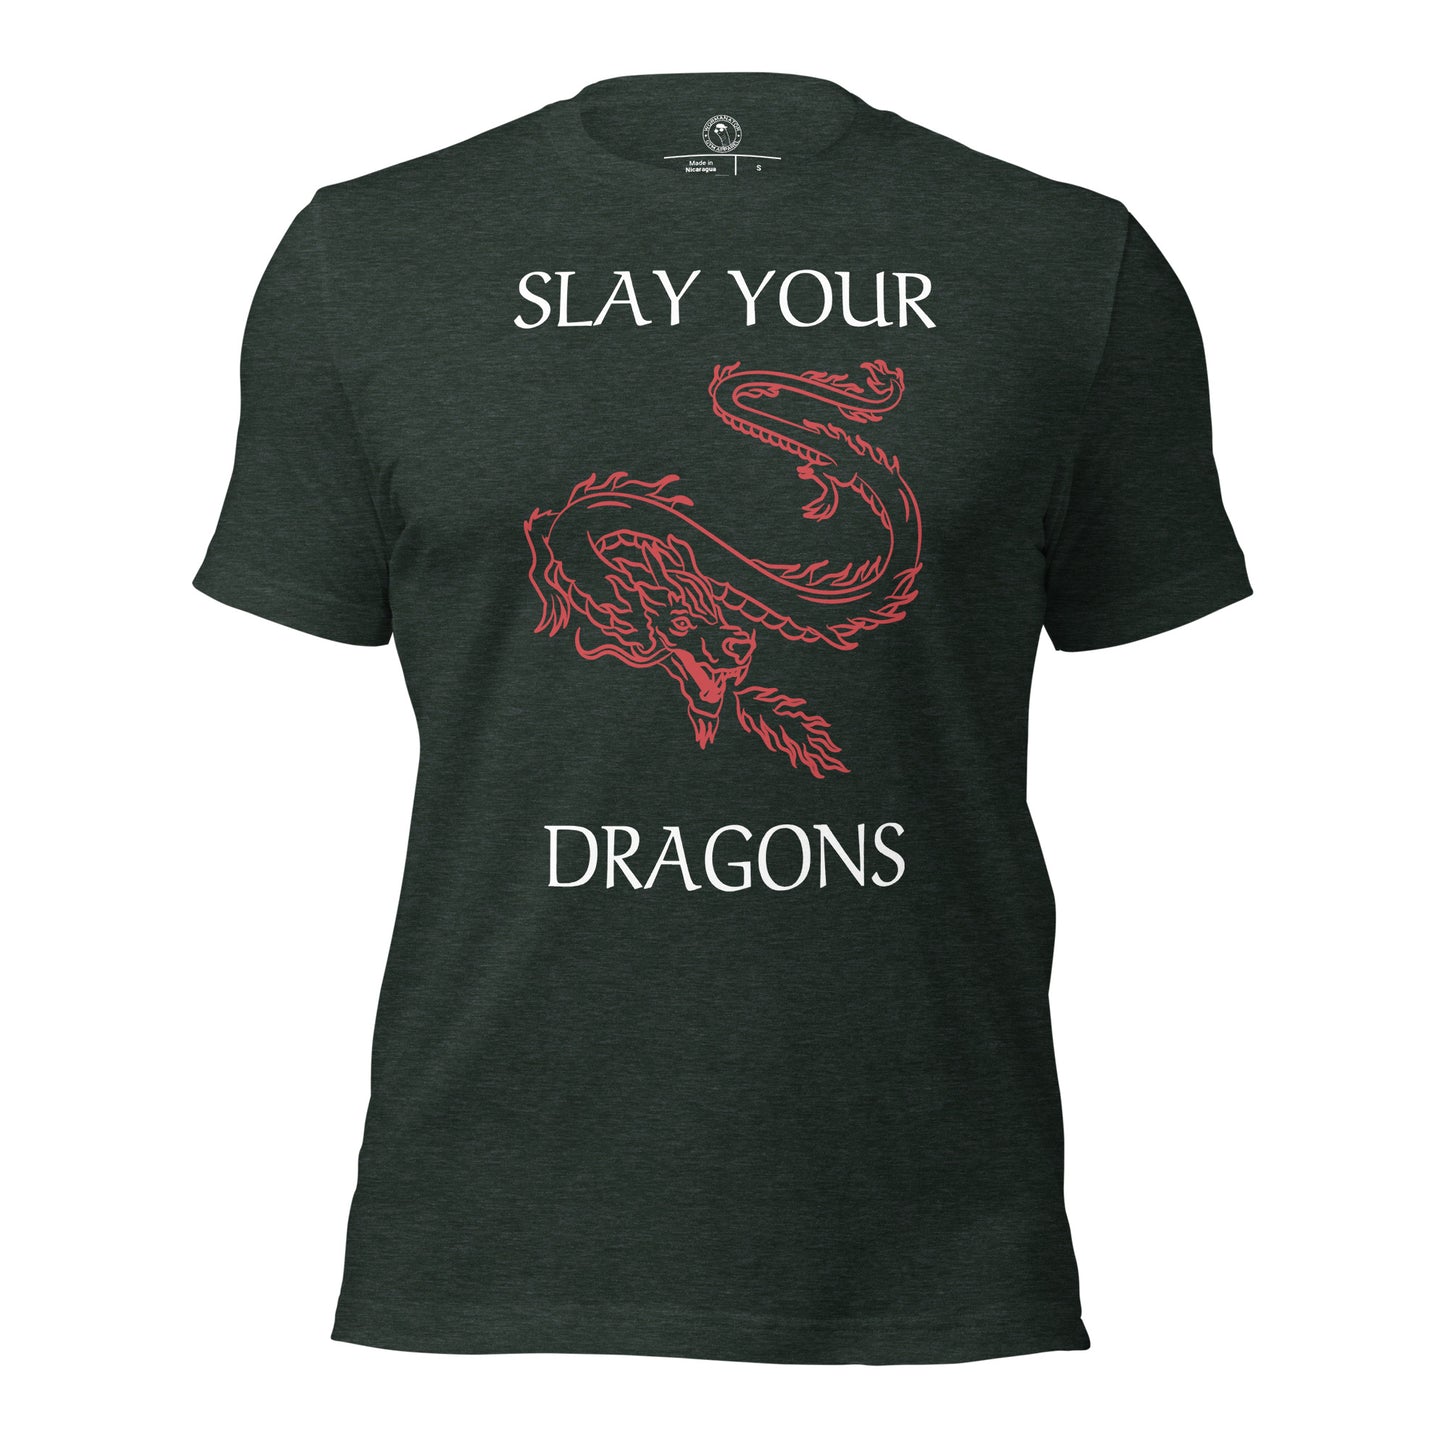 Slay Your Dragons Shirt in Heather Forest